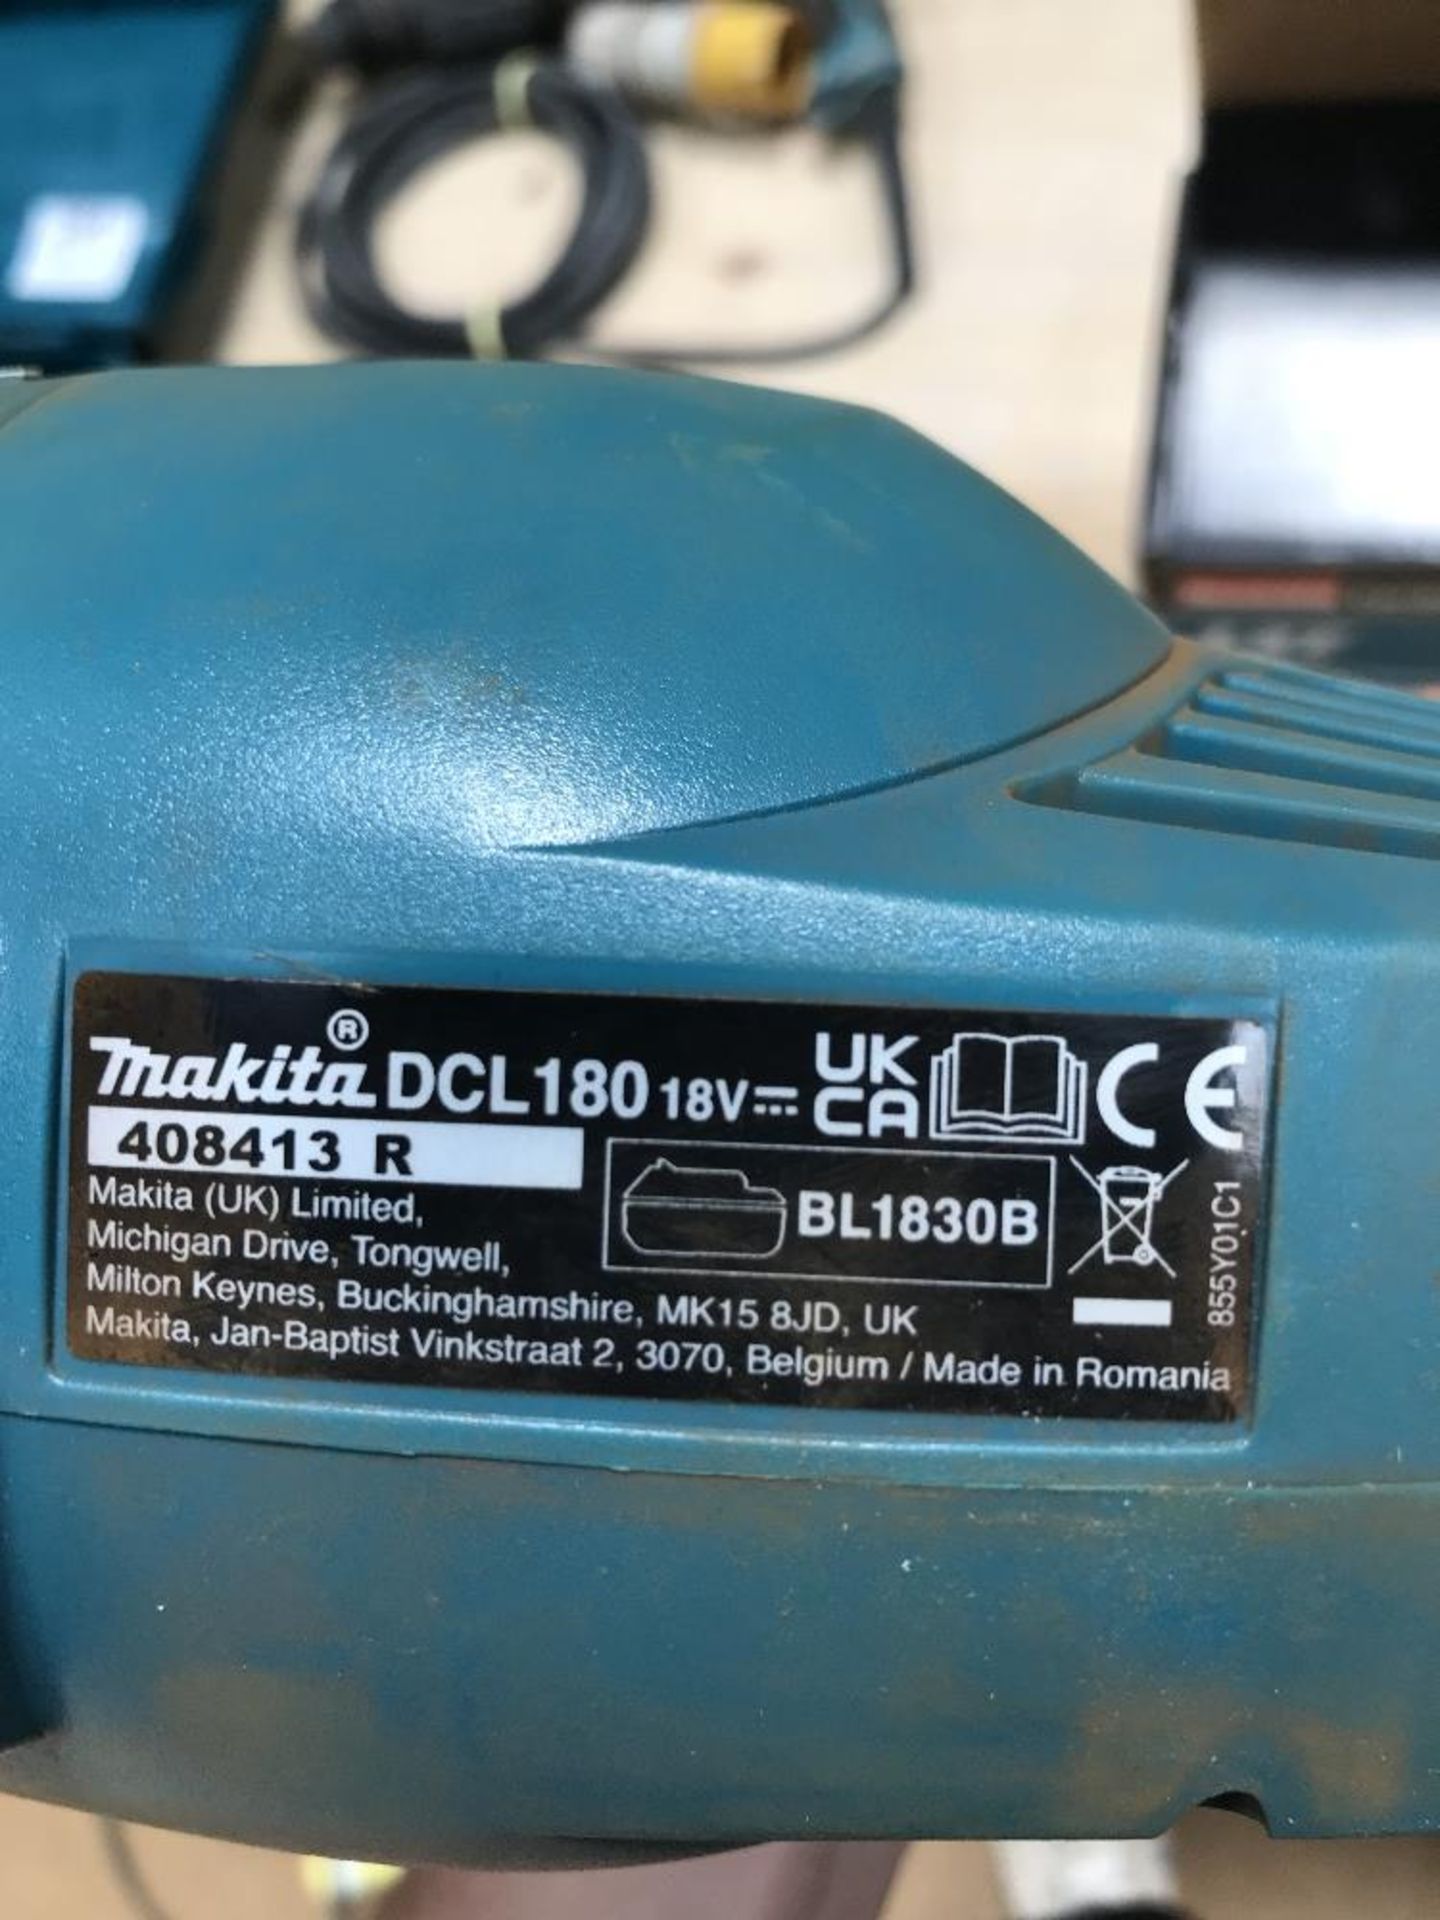 Makita DCL180Z Cordless Cleaner please note no battery or charger - Image 5 of 5